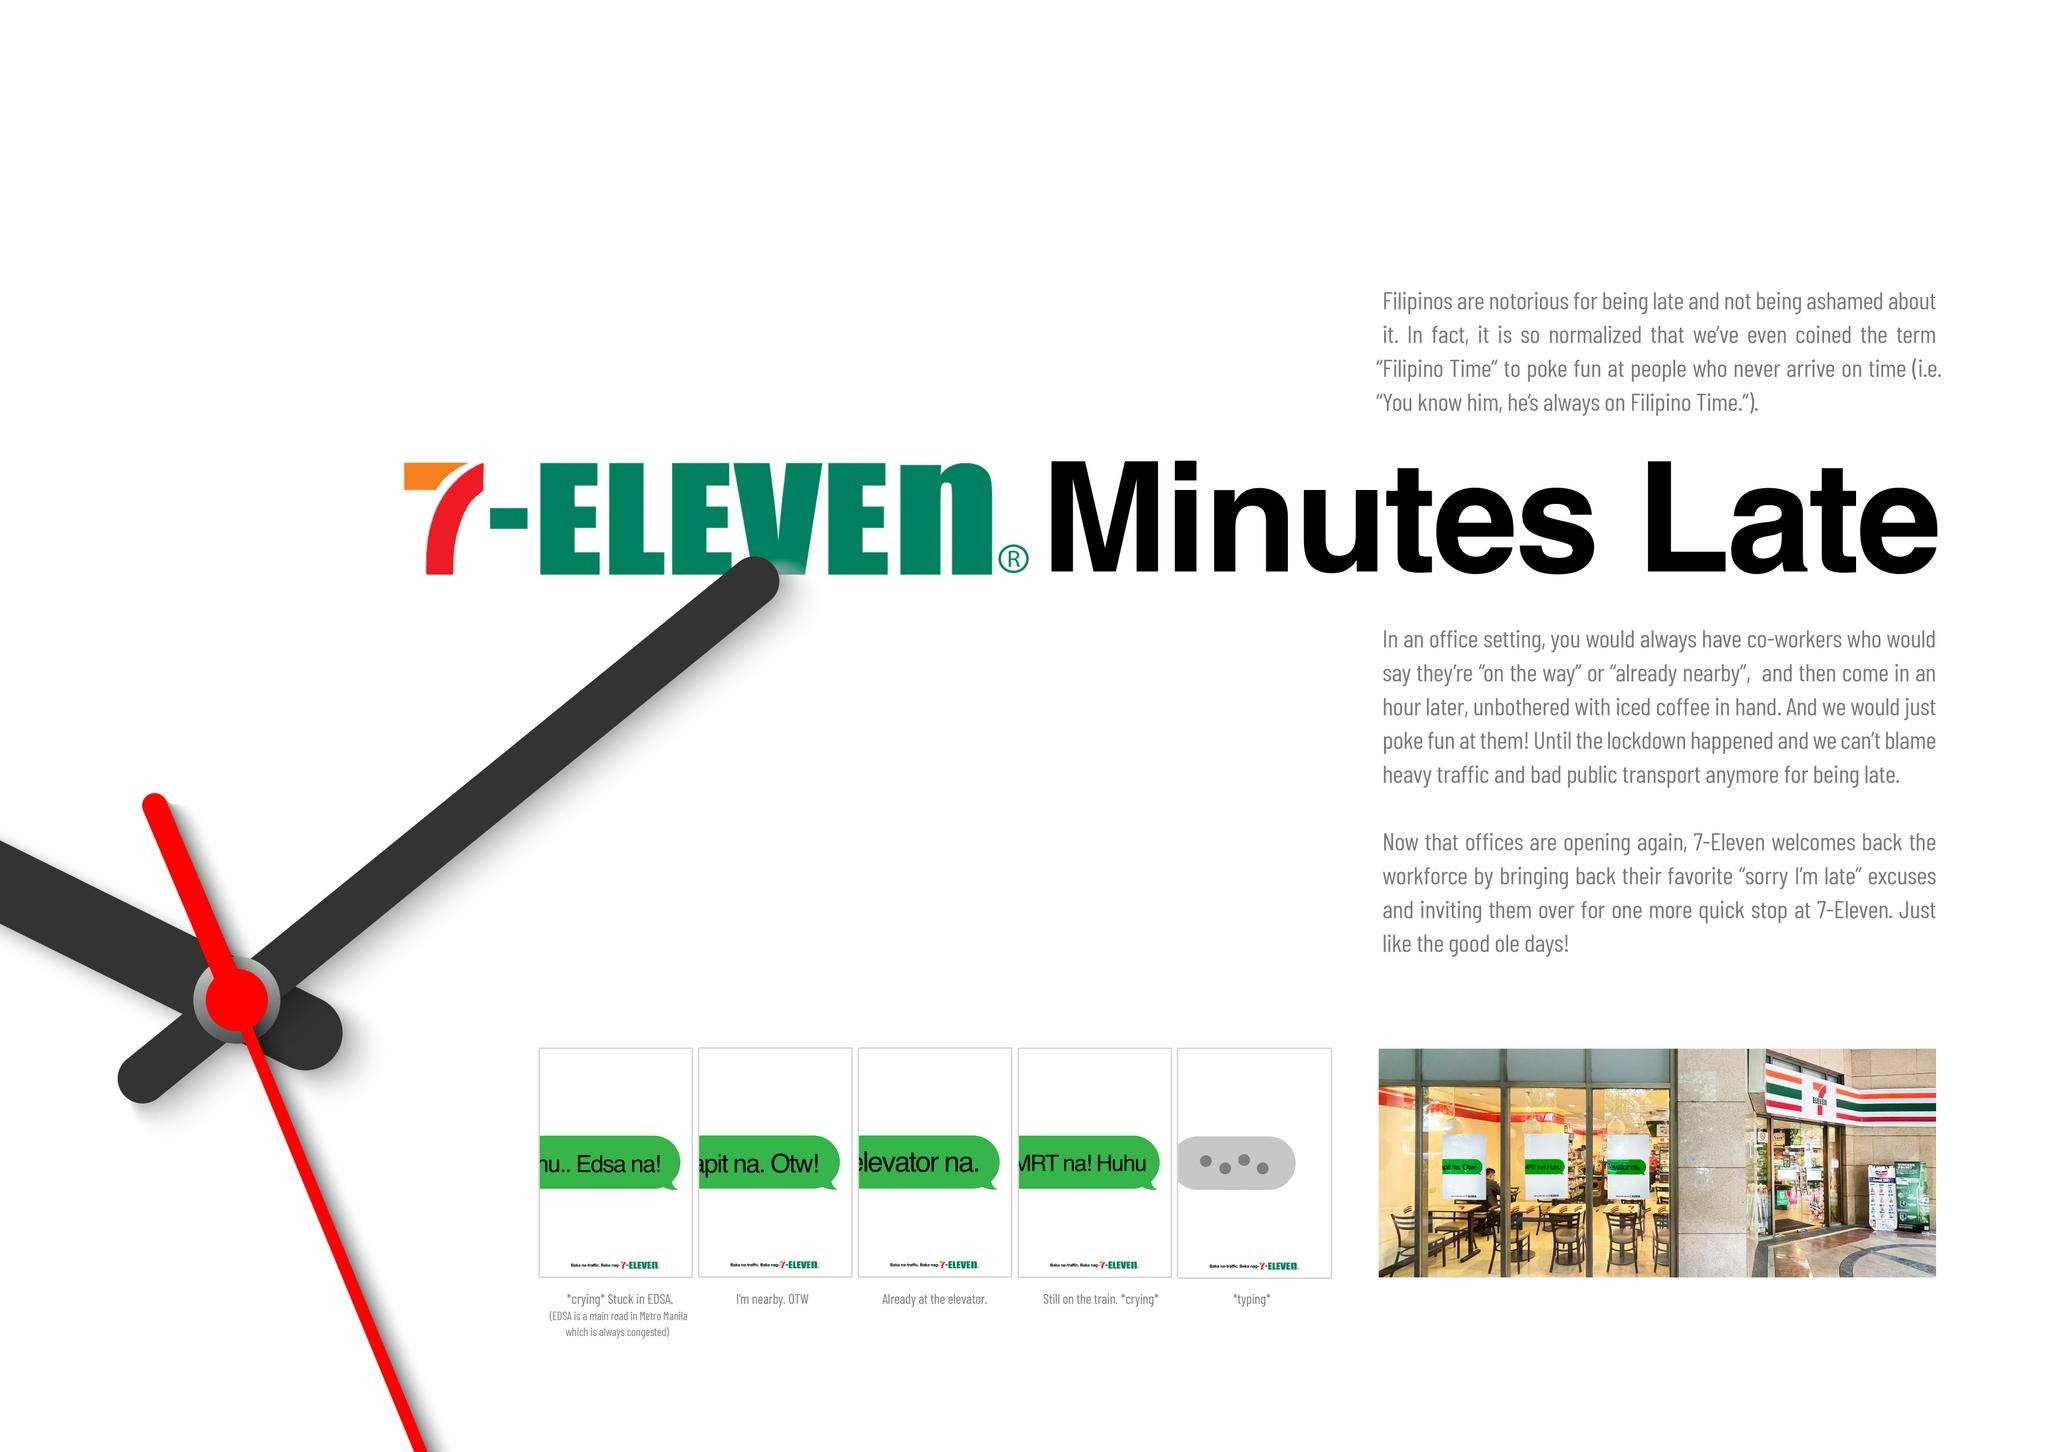 7-Eleven Minutes Late